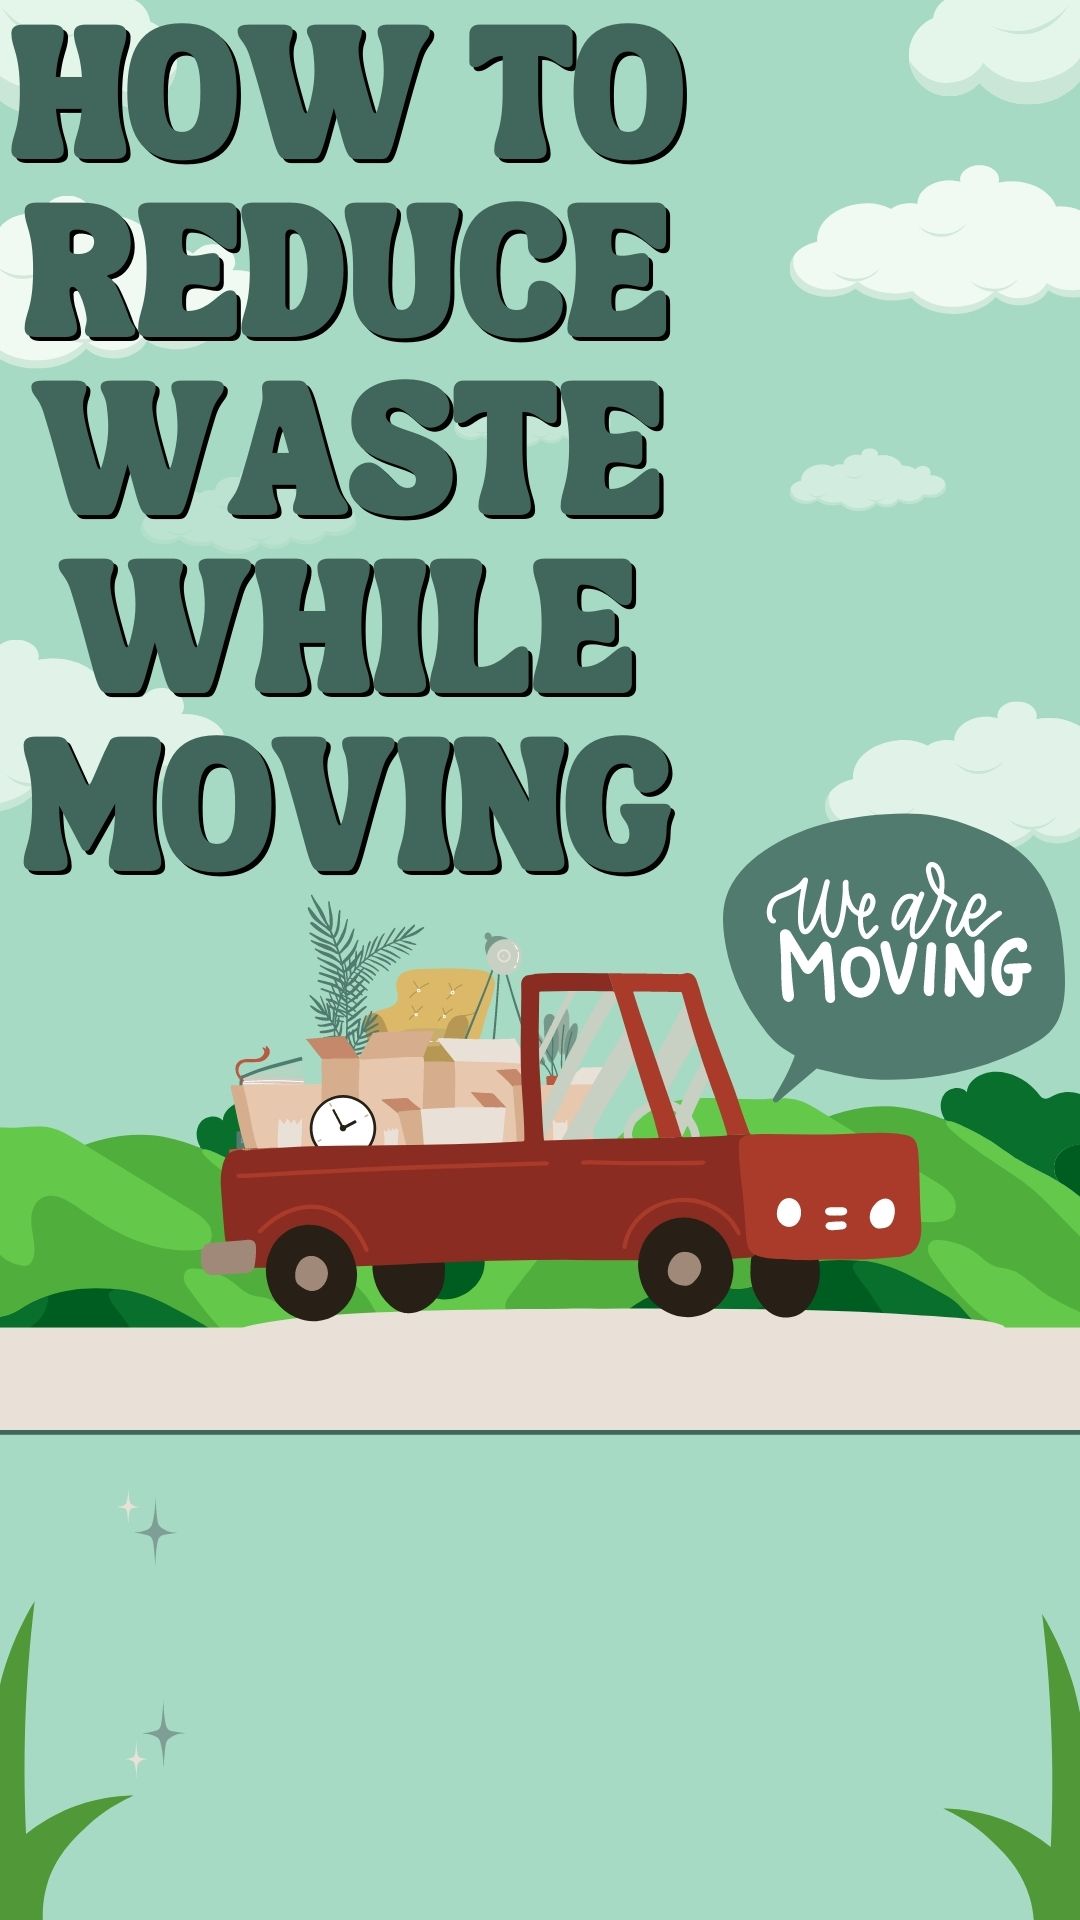 How to Reduce Waste While Moving